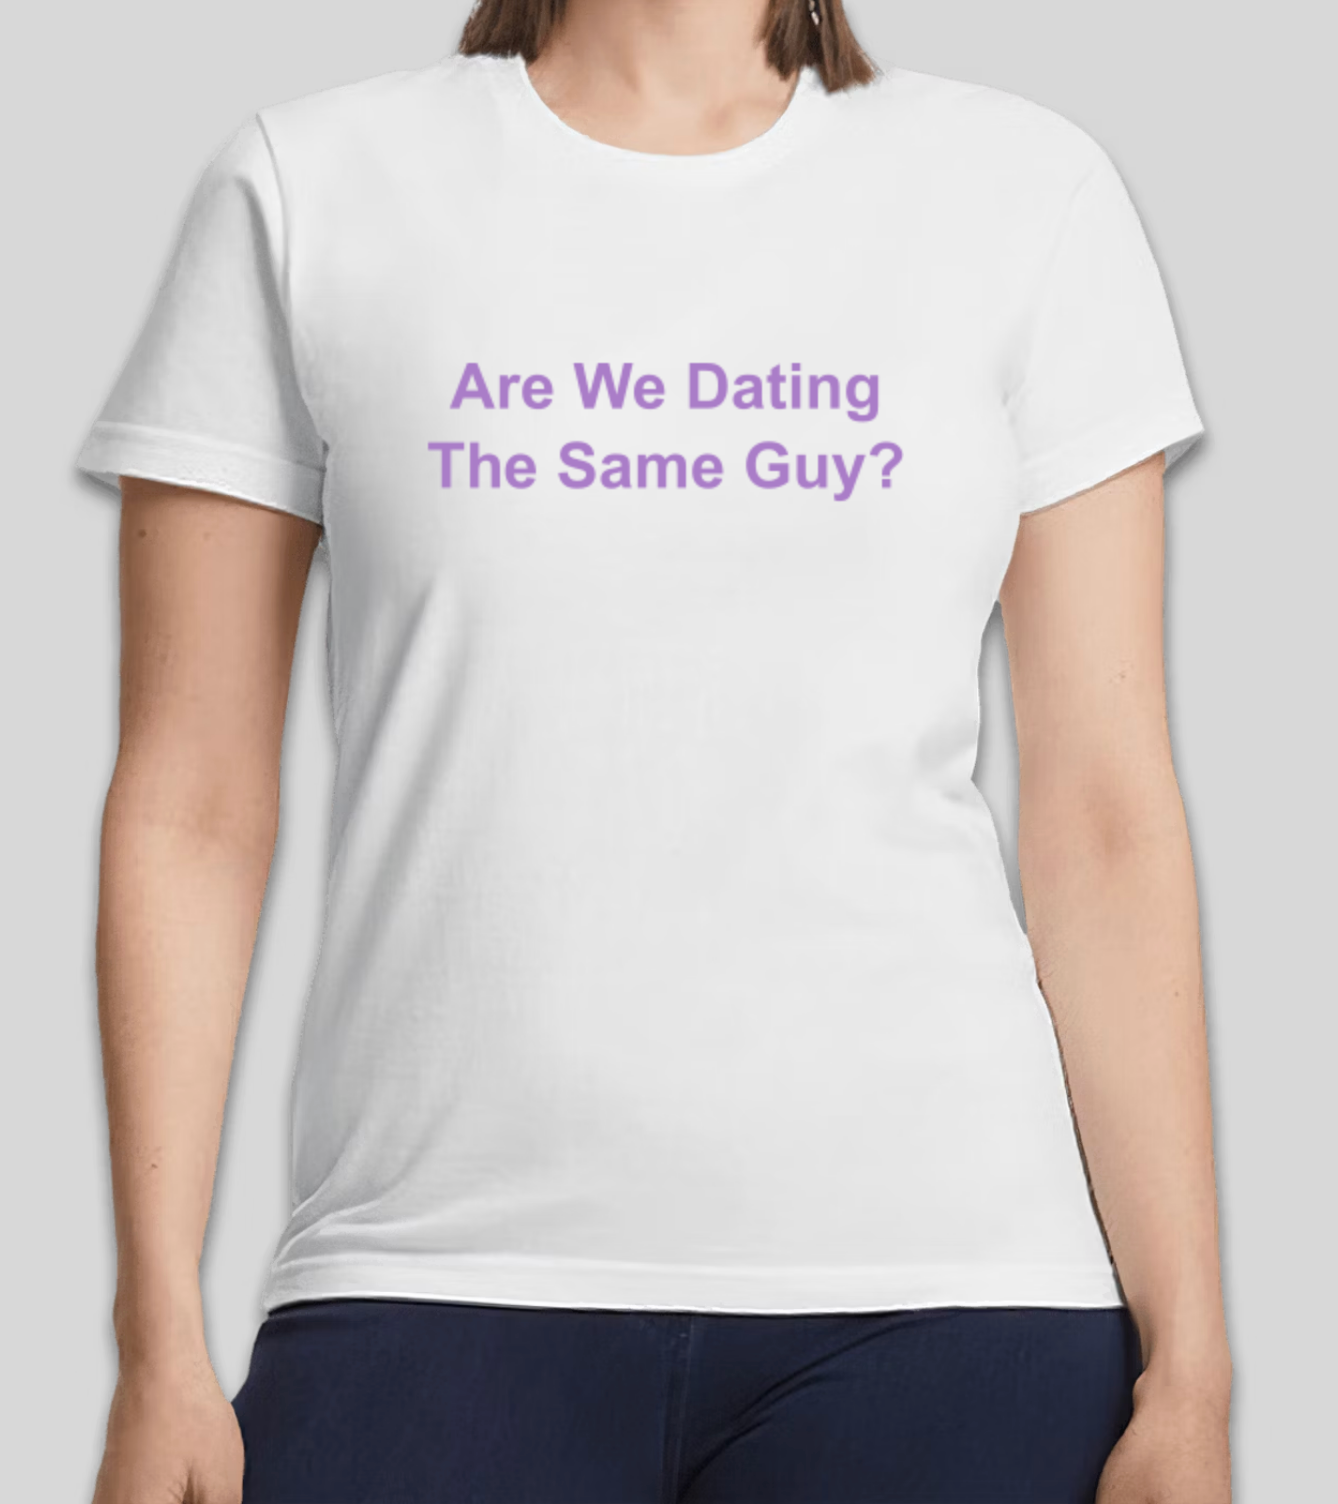 Are We Dating The Same Guy? Women's Shirt